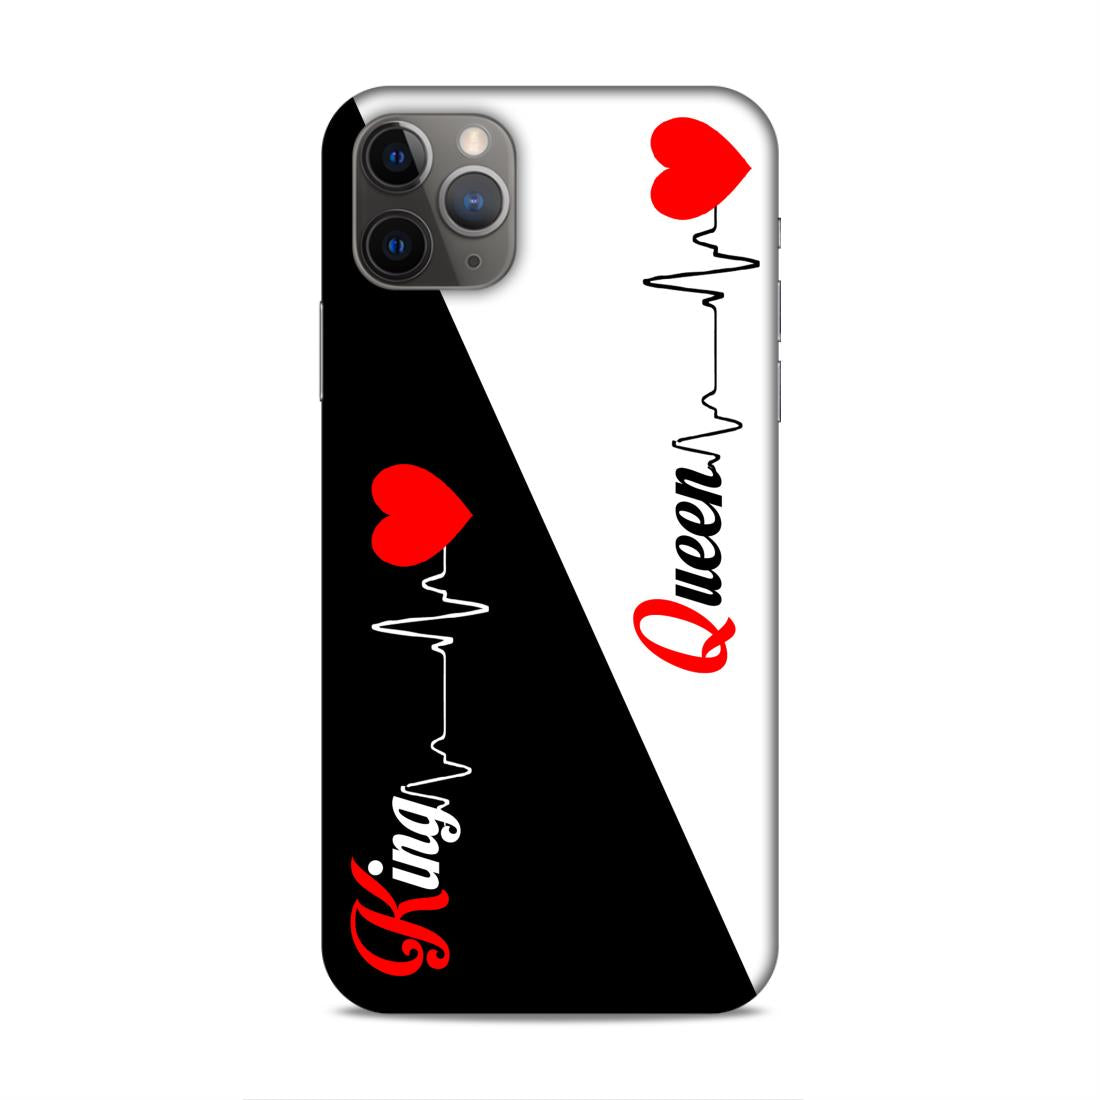 King Queen Love Hard Back Case For Apple iPhone 11 Pro Max